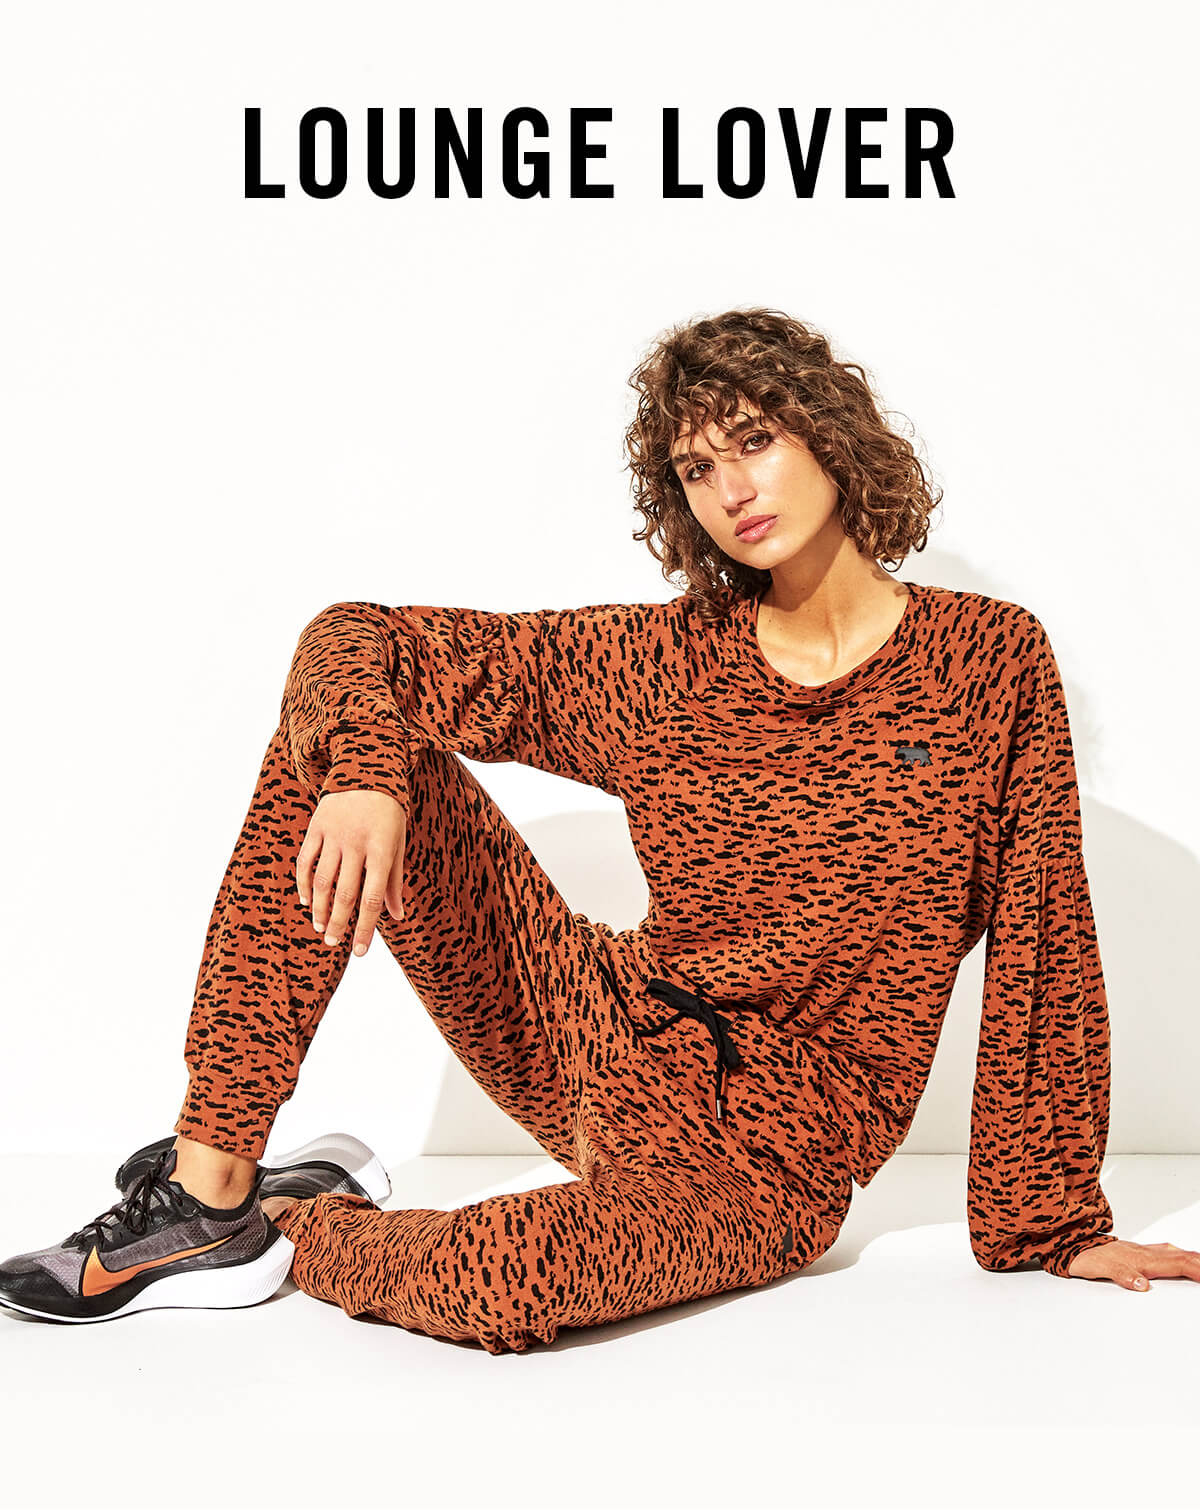 Lounge Lover